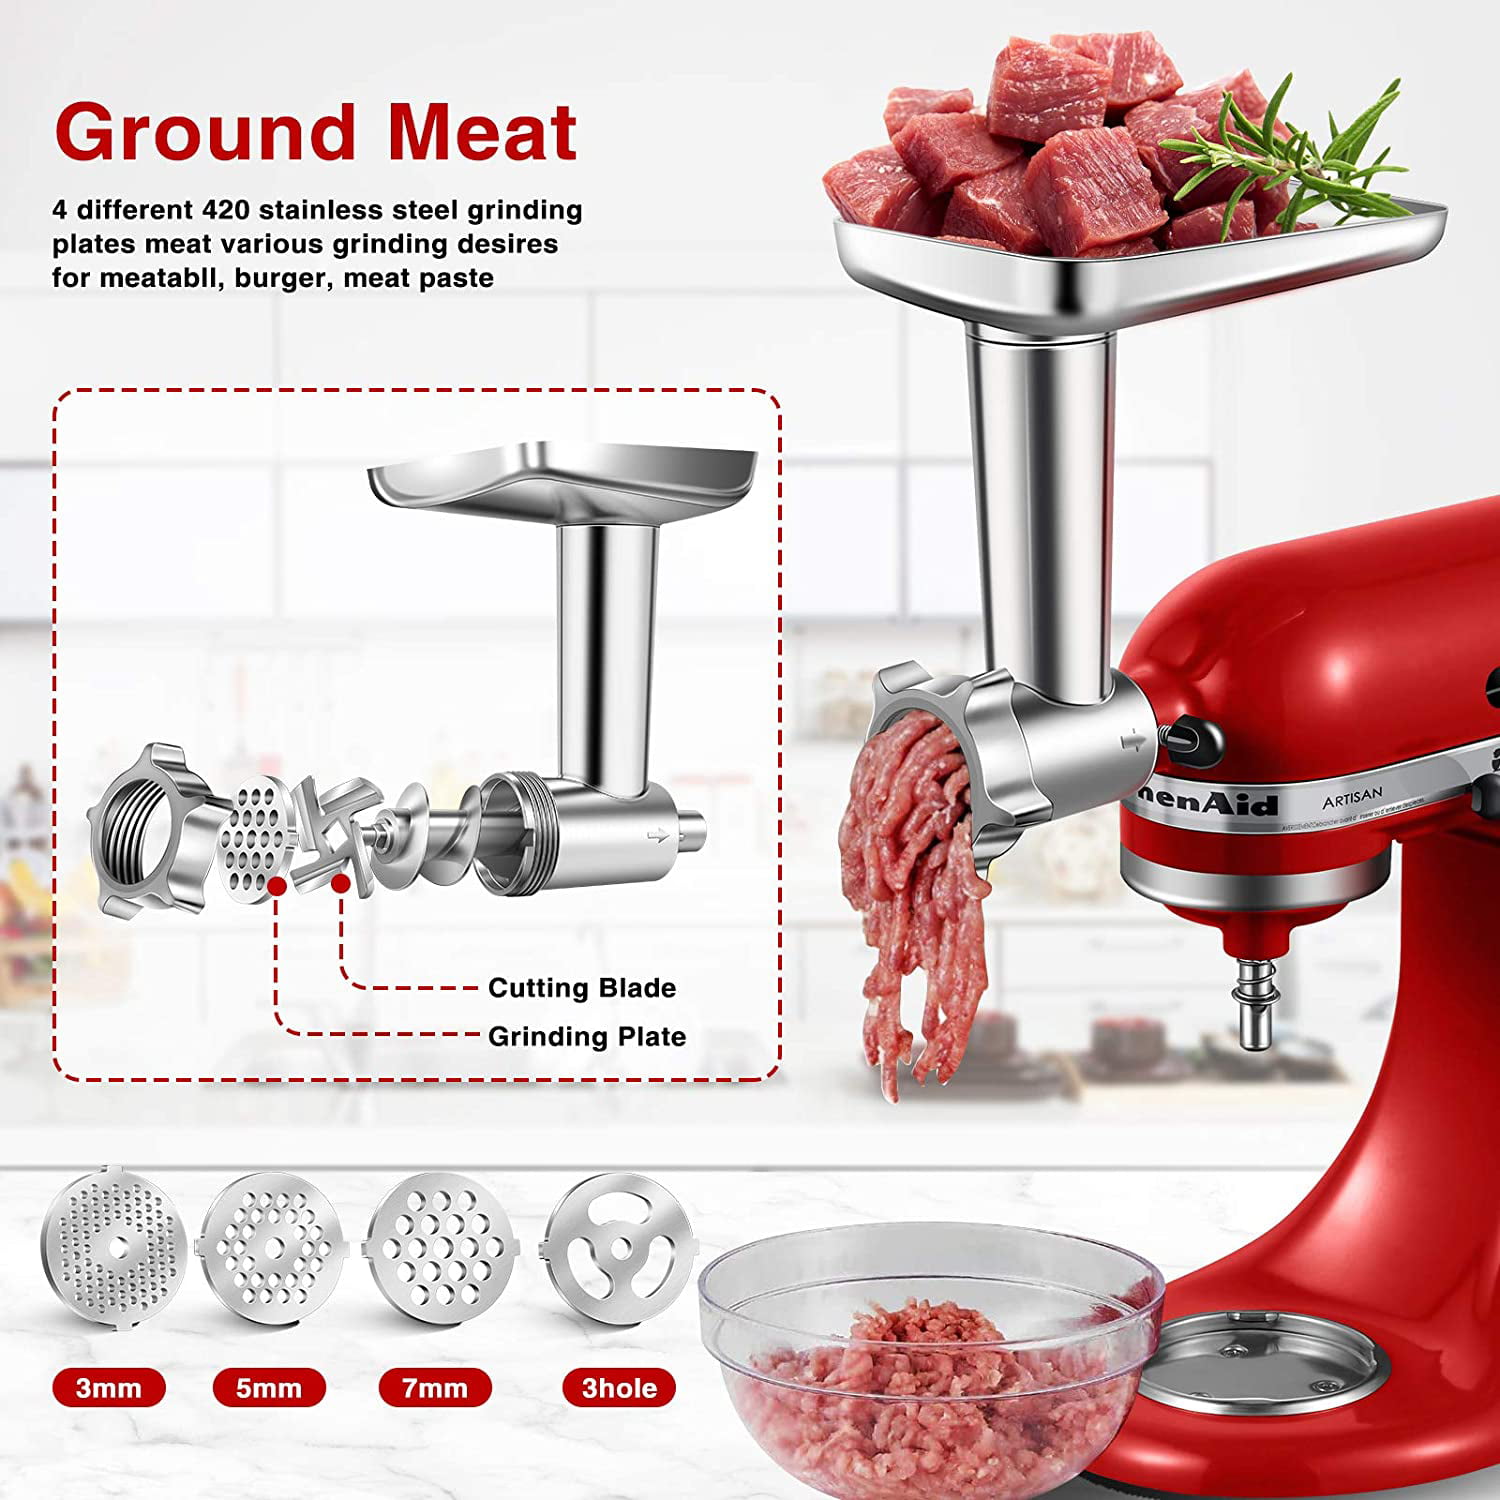 Newsets Upgraded Metal Food Meat Grinder Attachment for KitchenAid Stand Mixer, KitchenAid Meat Grinder Attachments Including Sausage Stuffer & 4